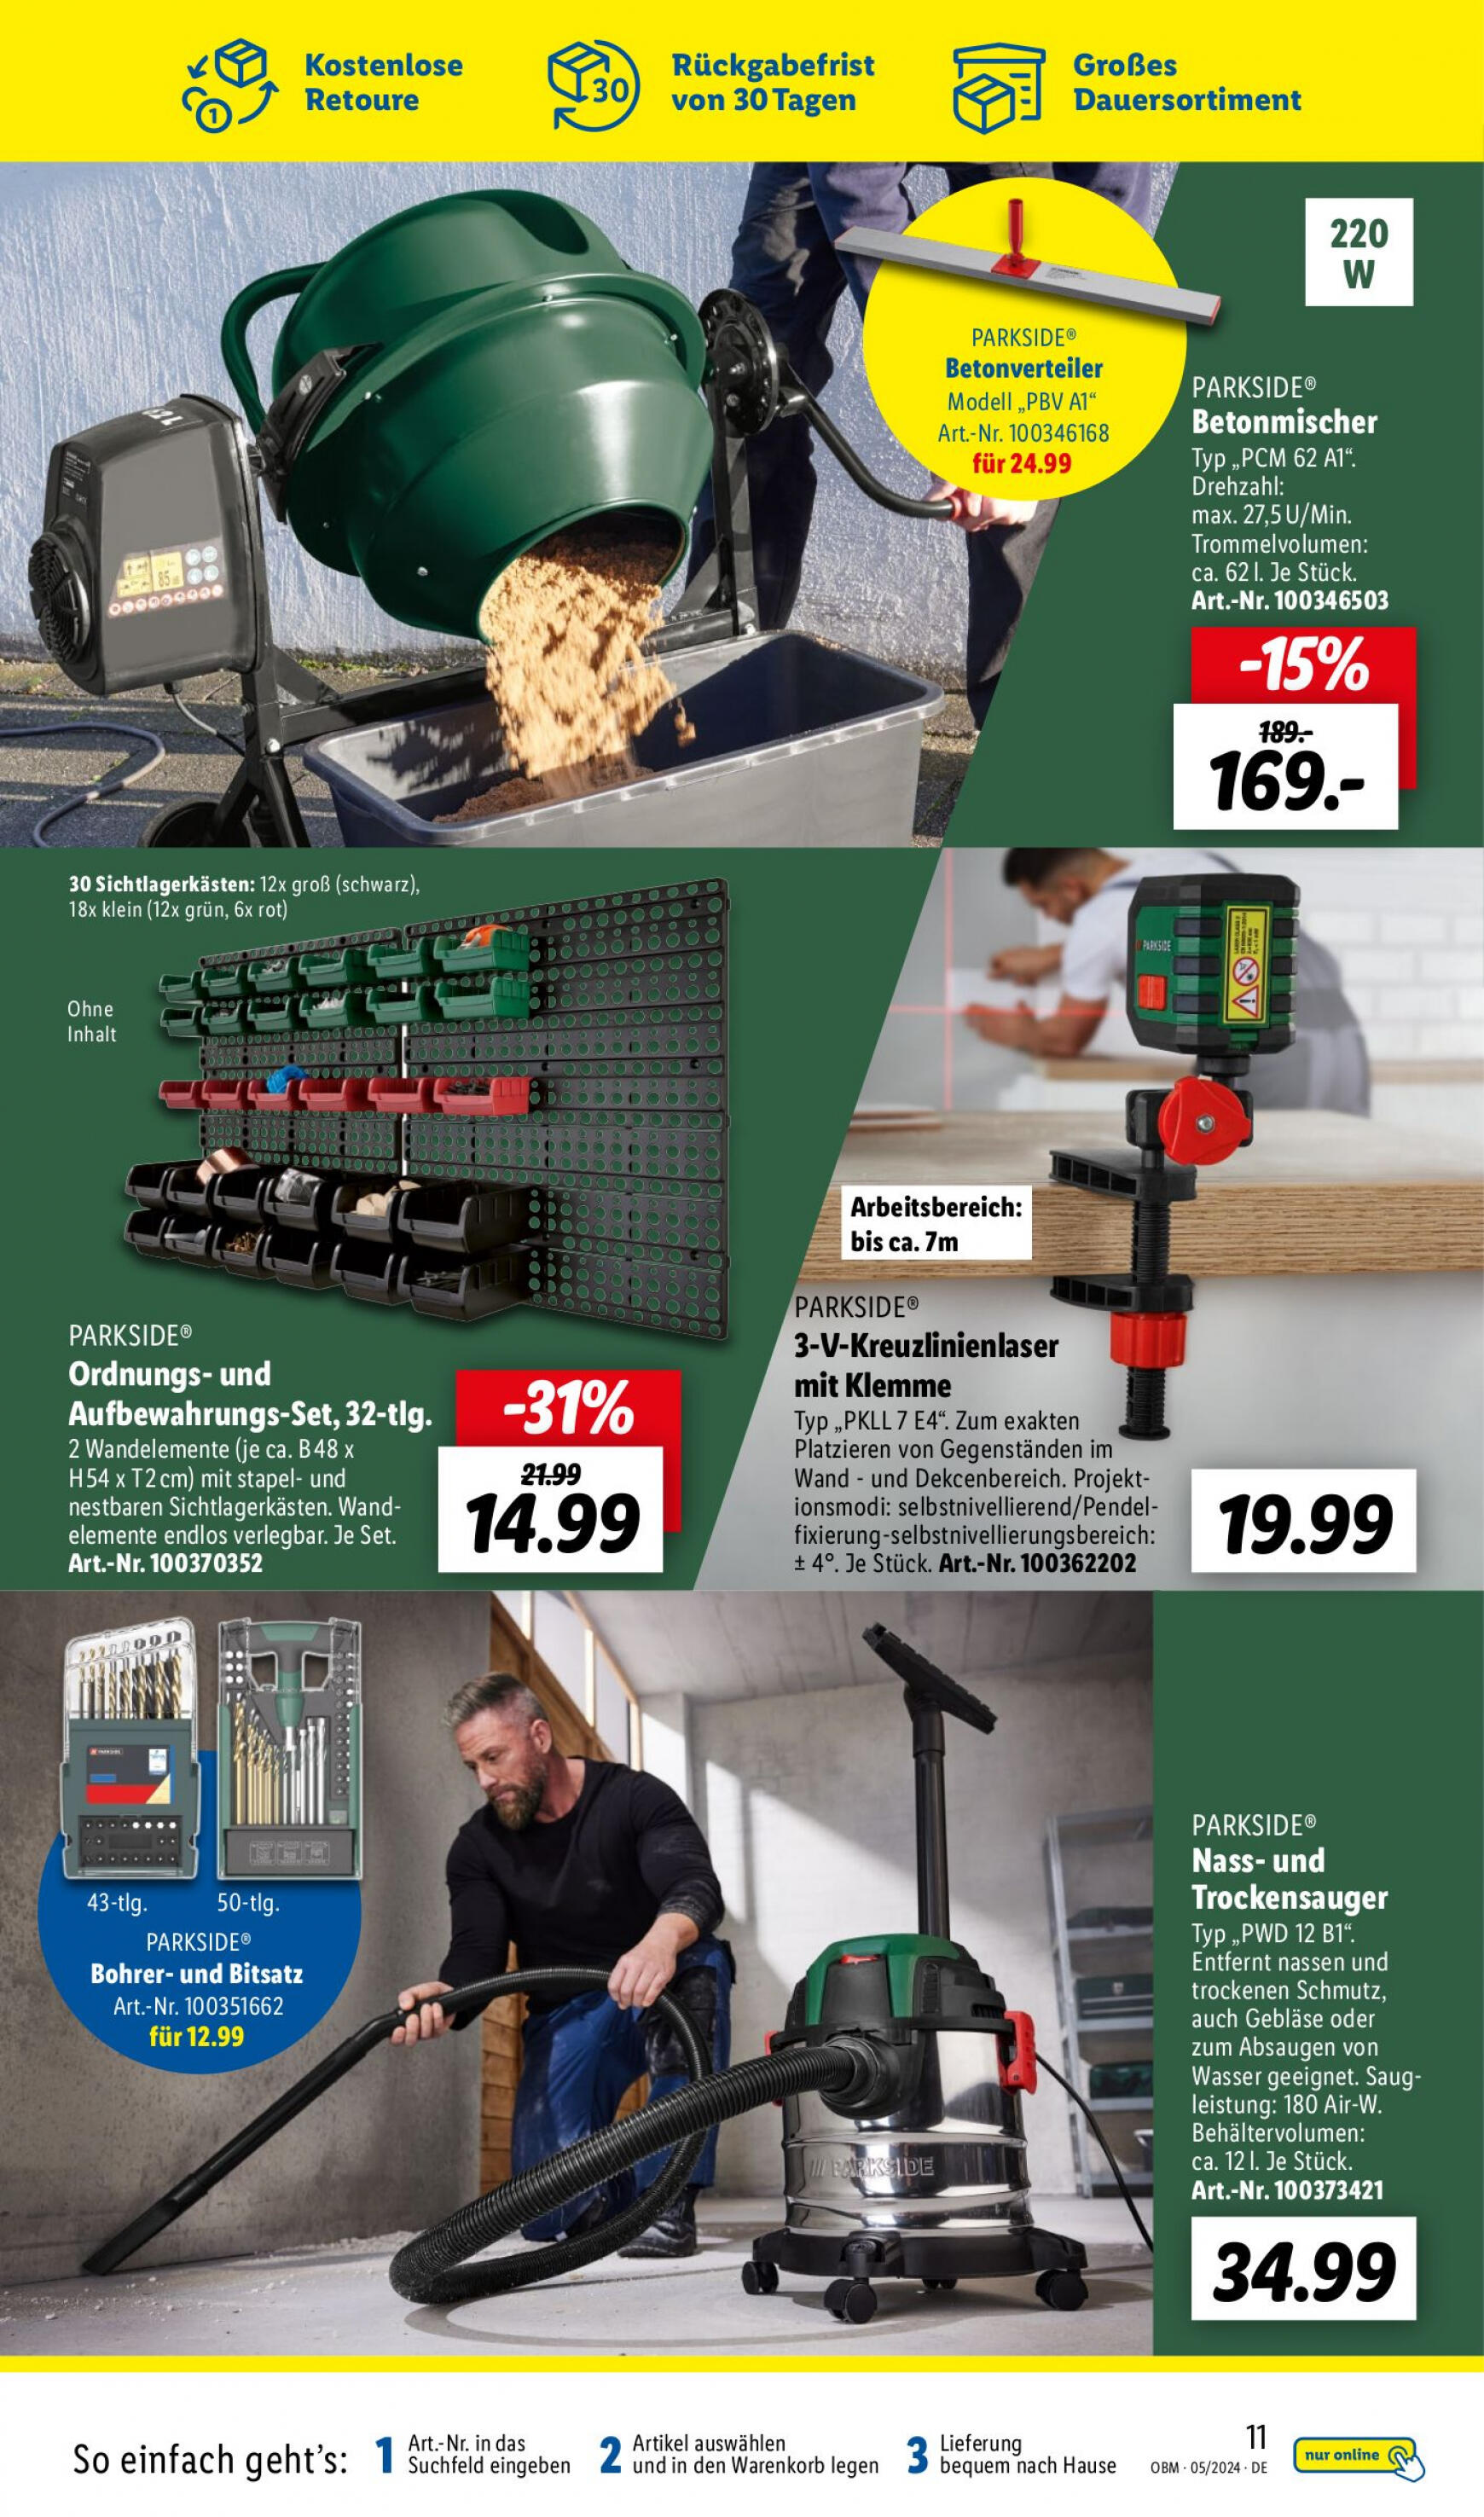 lidl - Flyer Lidl - Aktuelle Onlineshop-Highlights aktuell 01.05. - 31.05. - page: 11